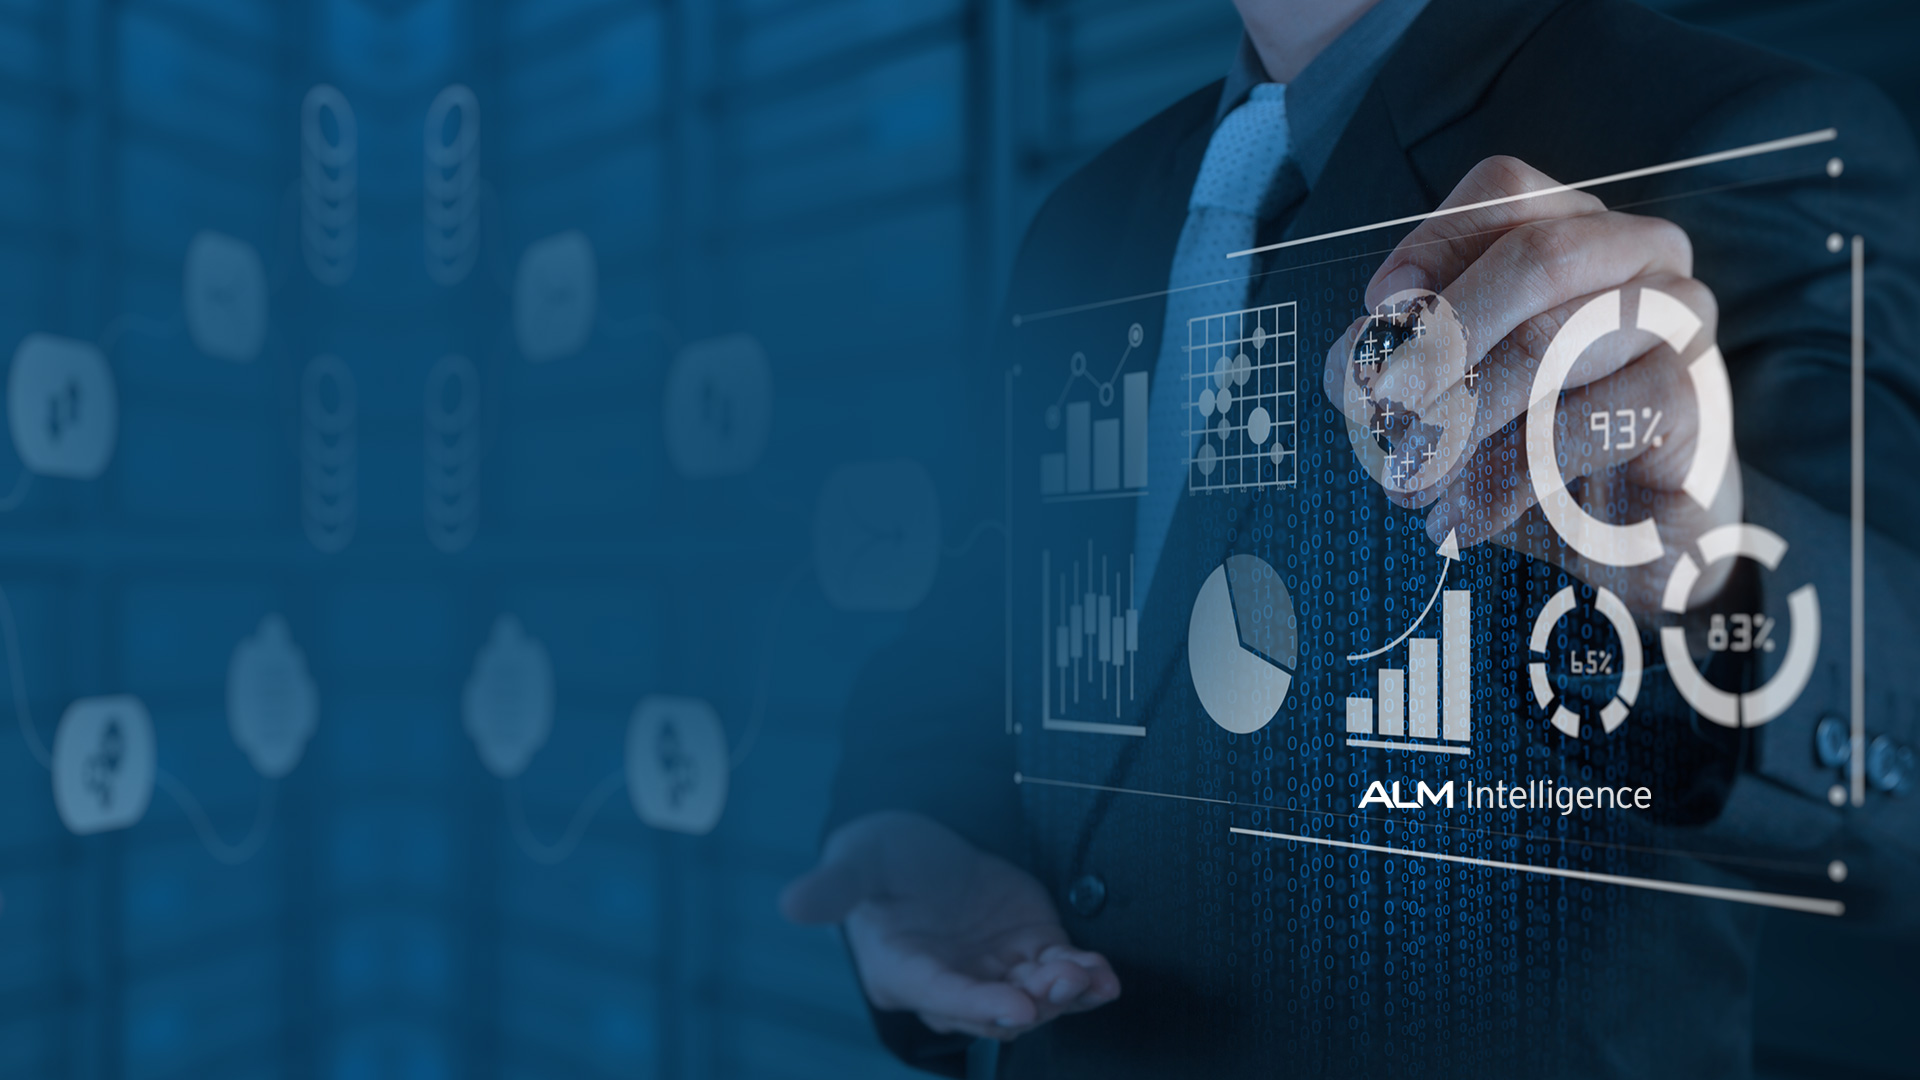 GEP Named Leader: ALM Vanguard for Procurement Operations Consulting